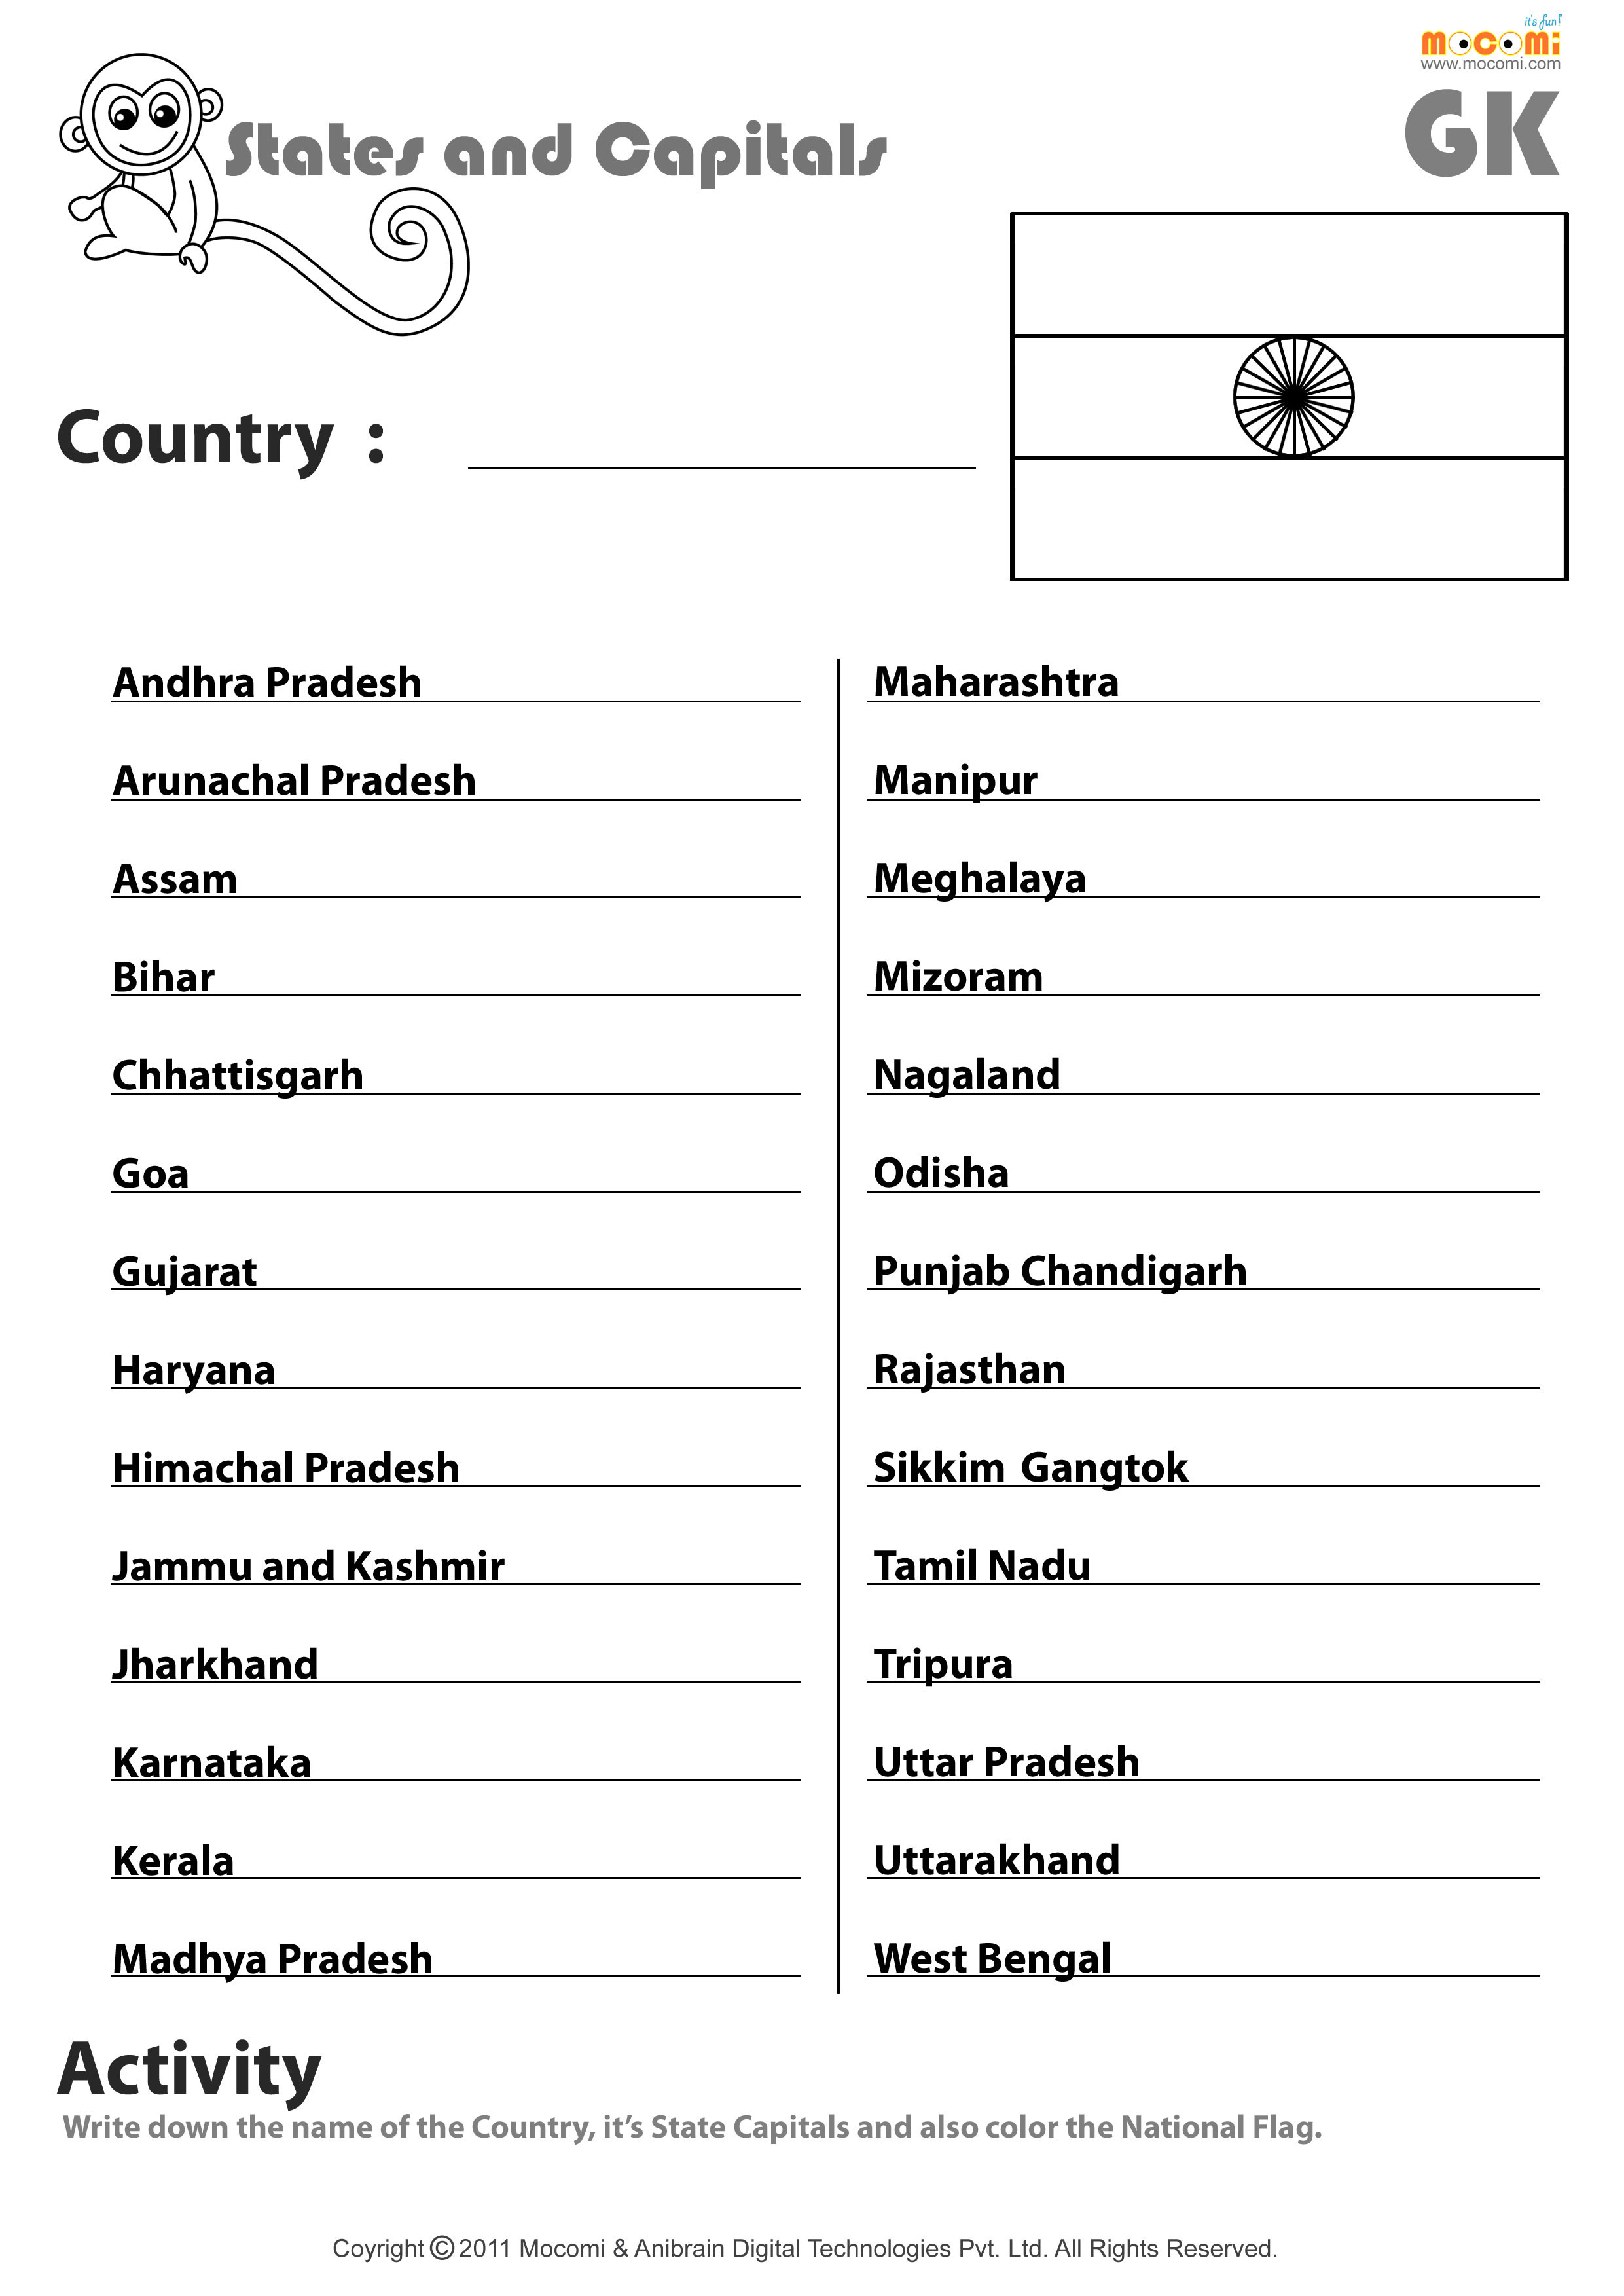 State Capitals Quiz Printable Indian States and their Capitals English Worksheets for